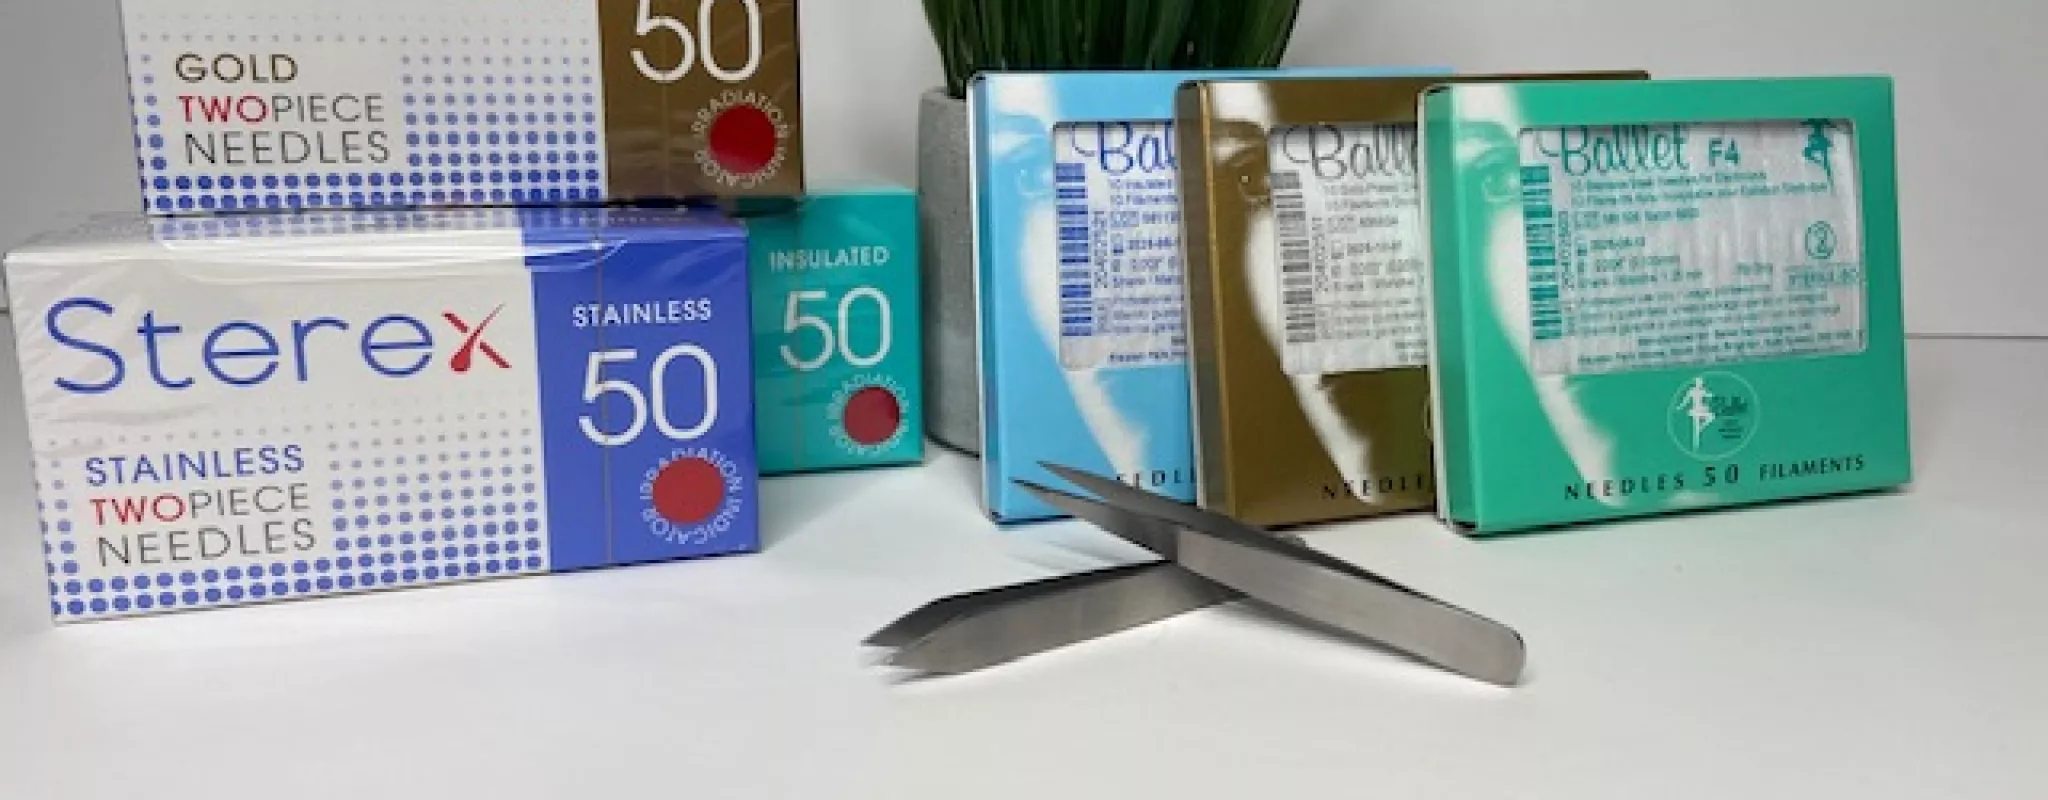 Ballet and Sterex electrolysis needles in a variety of sizes